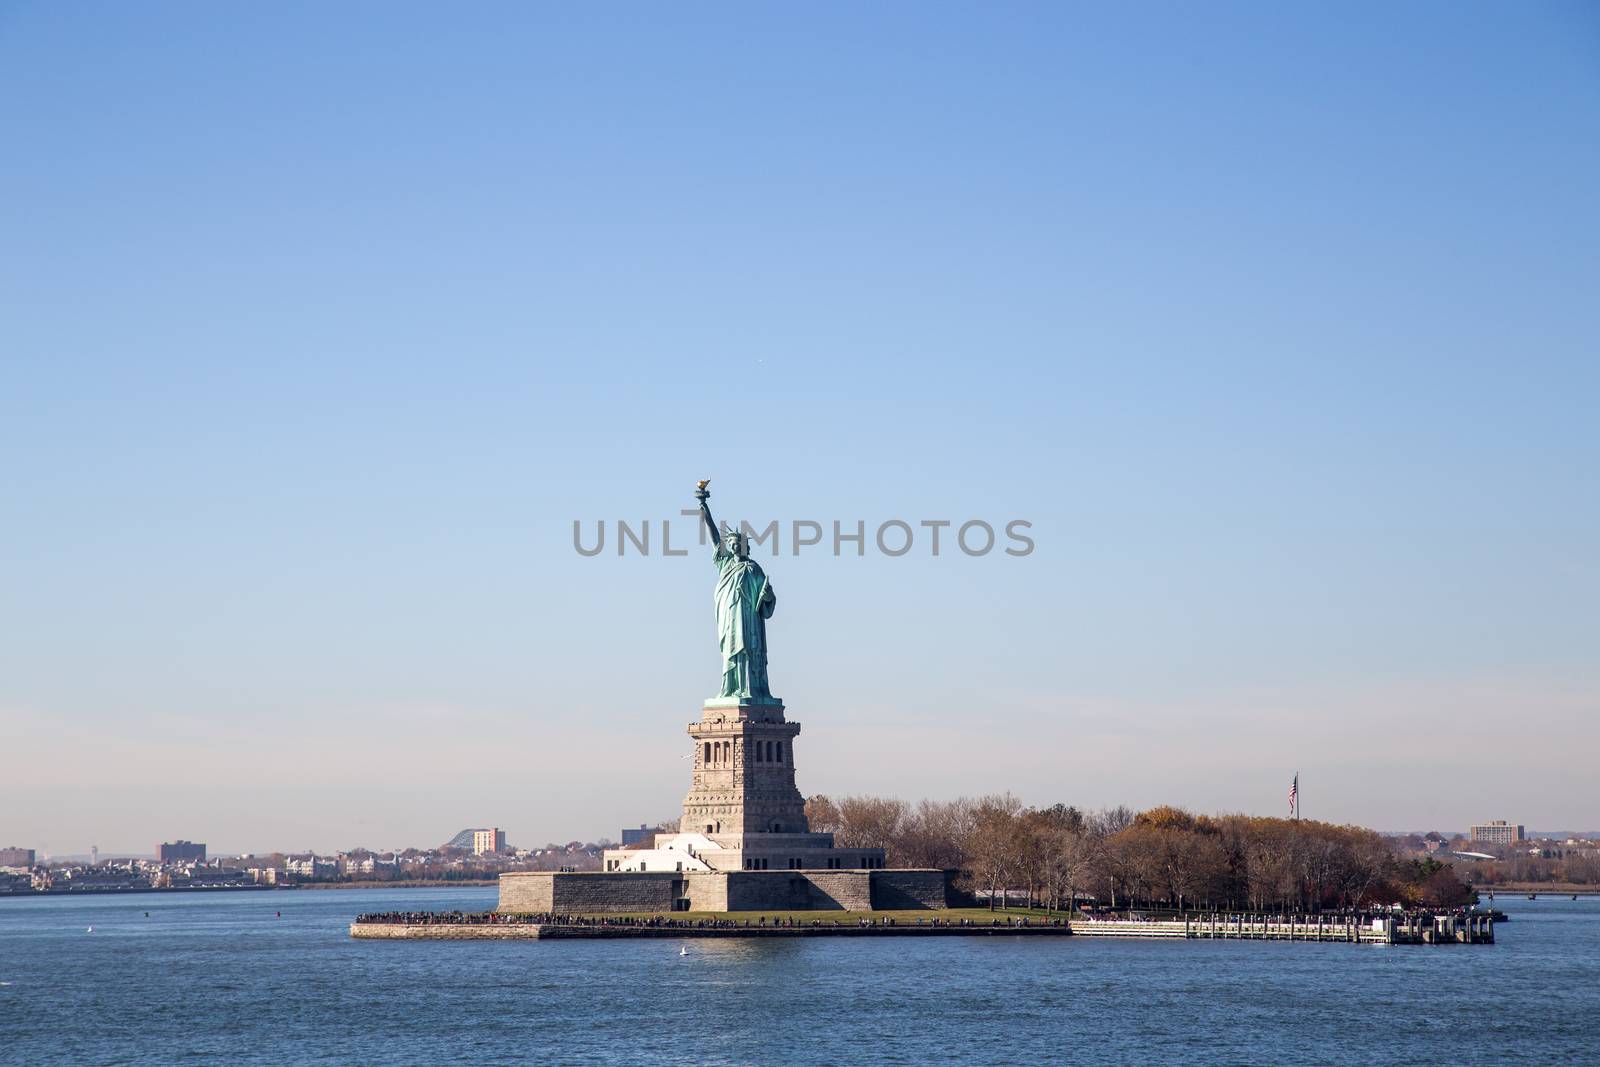 The Statue of Liberty in New York as seen from the Staten Island ferry boat